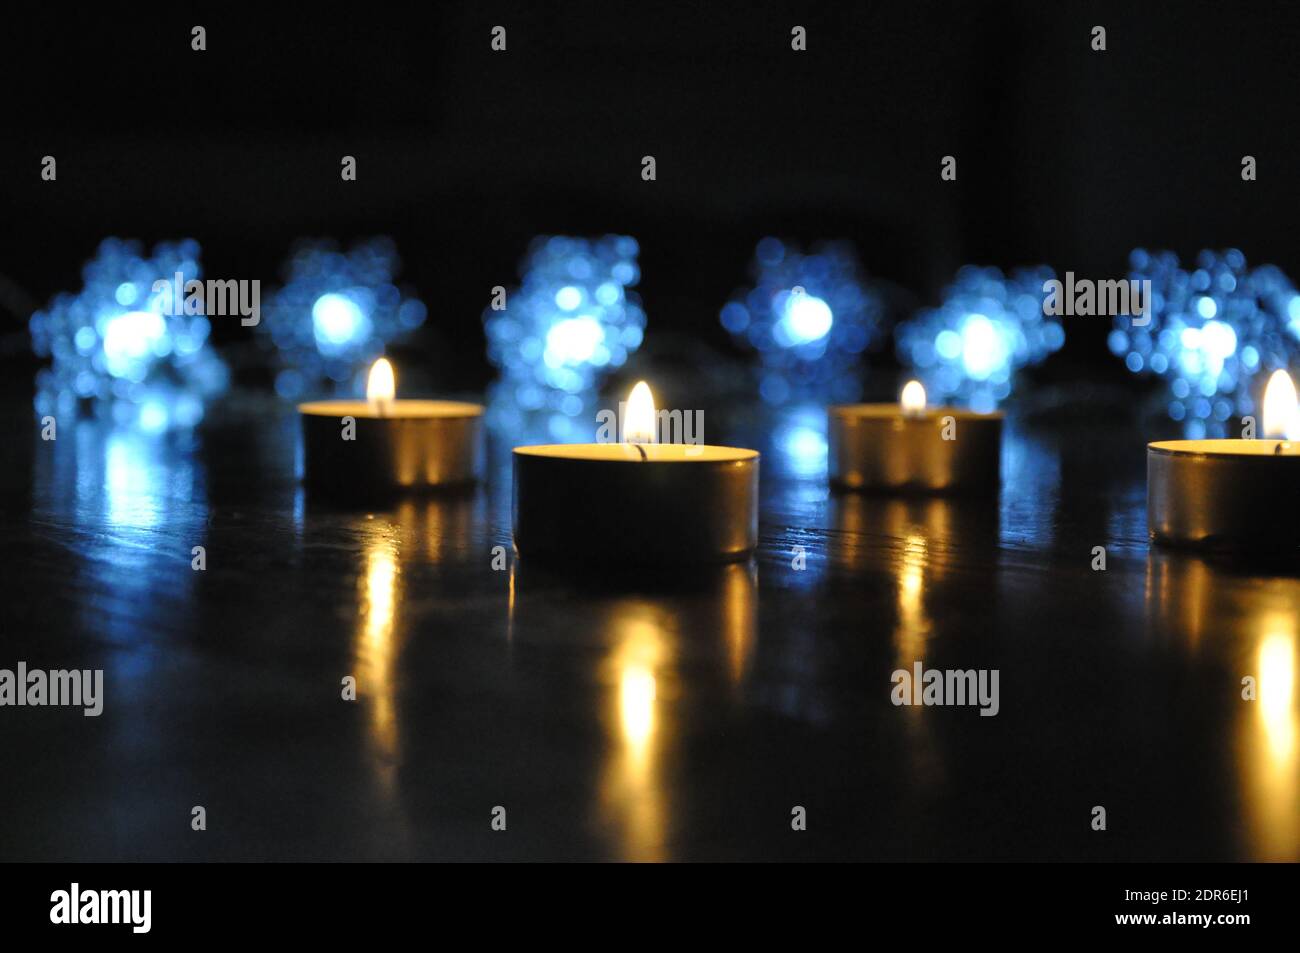 Christmas candles burning at night.  Golden light of candle flame. Decoration, black.Abstract candles background. Stock Photo